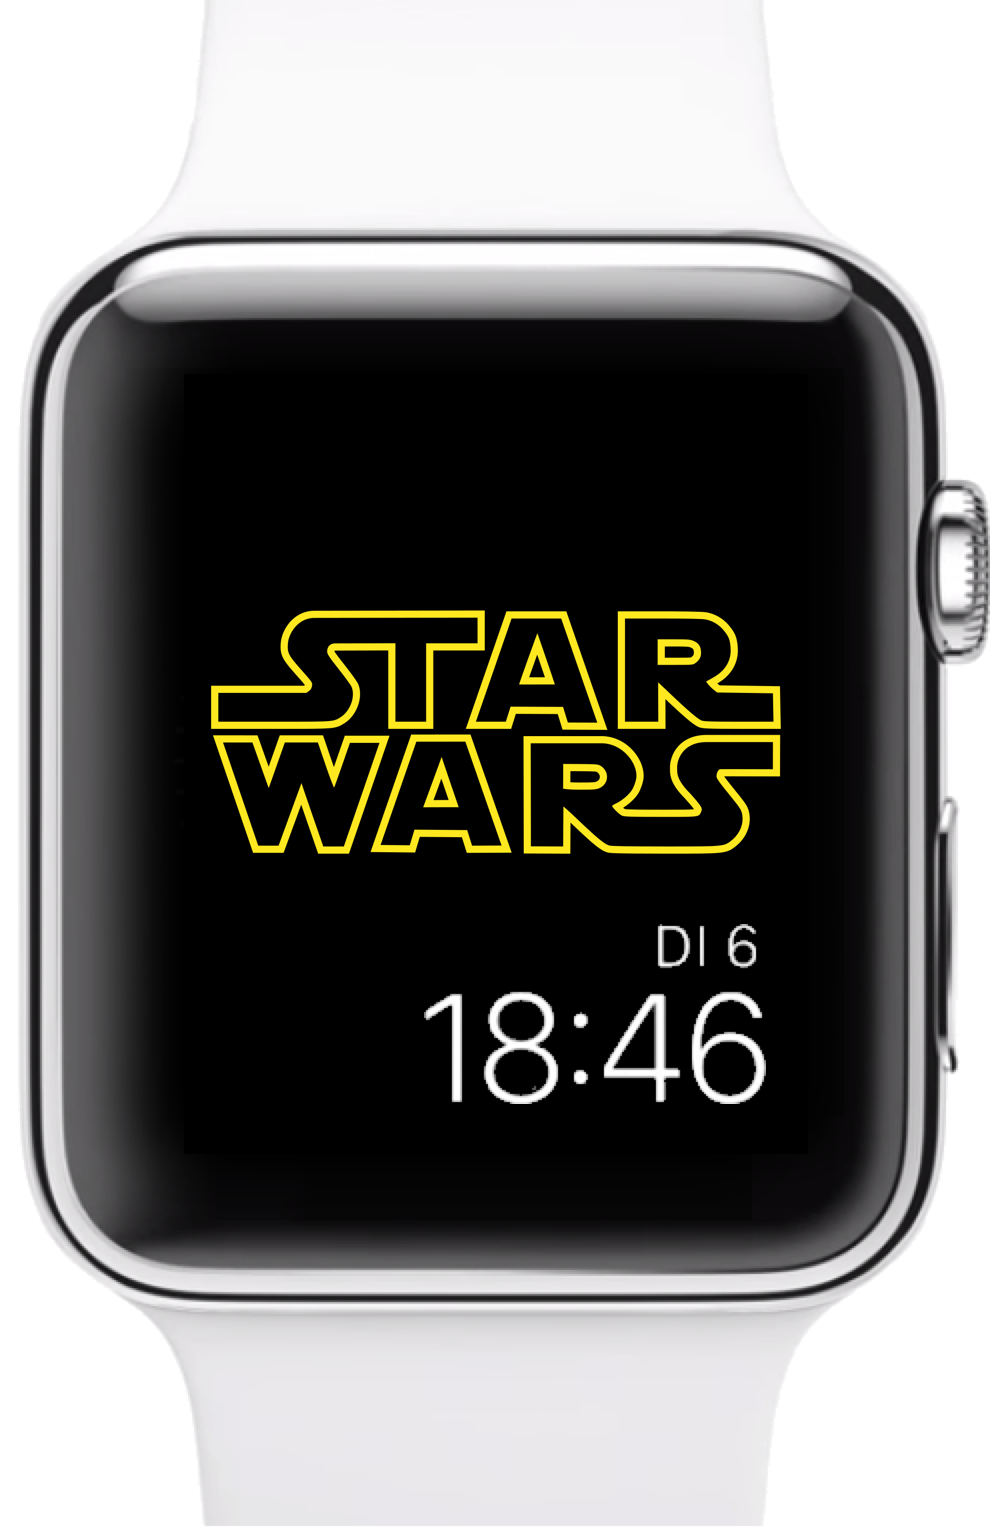 Apple Watch Faces — Star Wars NEW watch faces because of ...